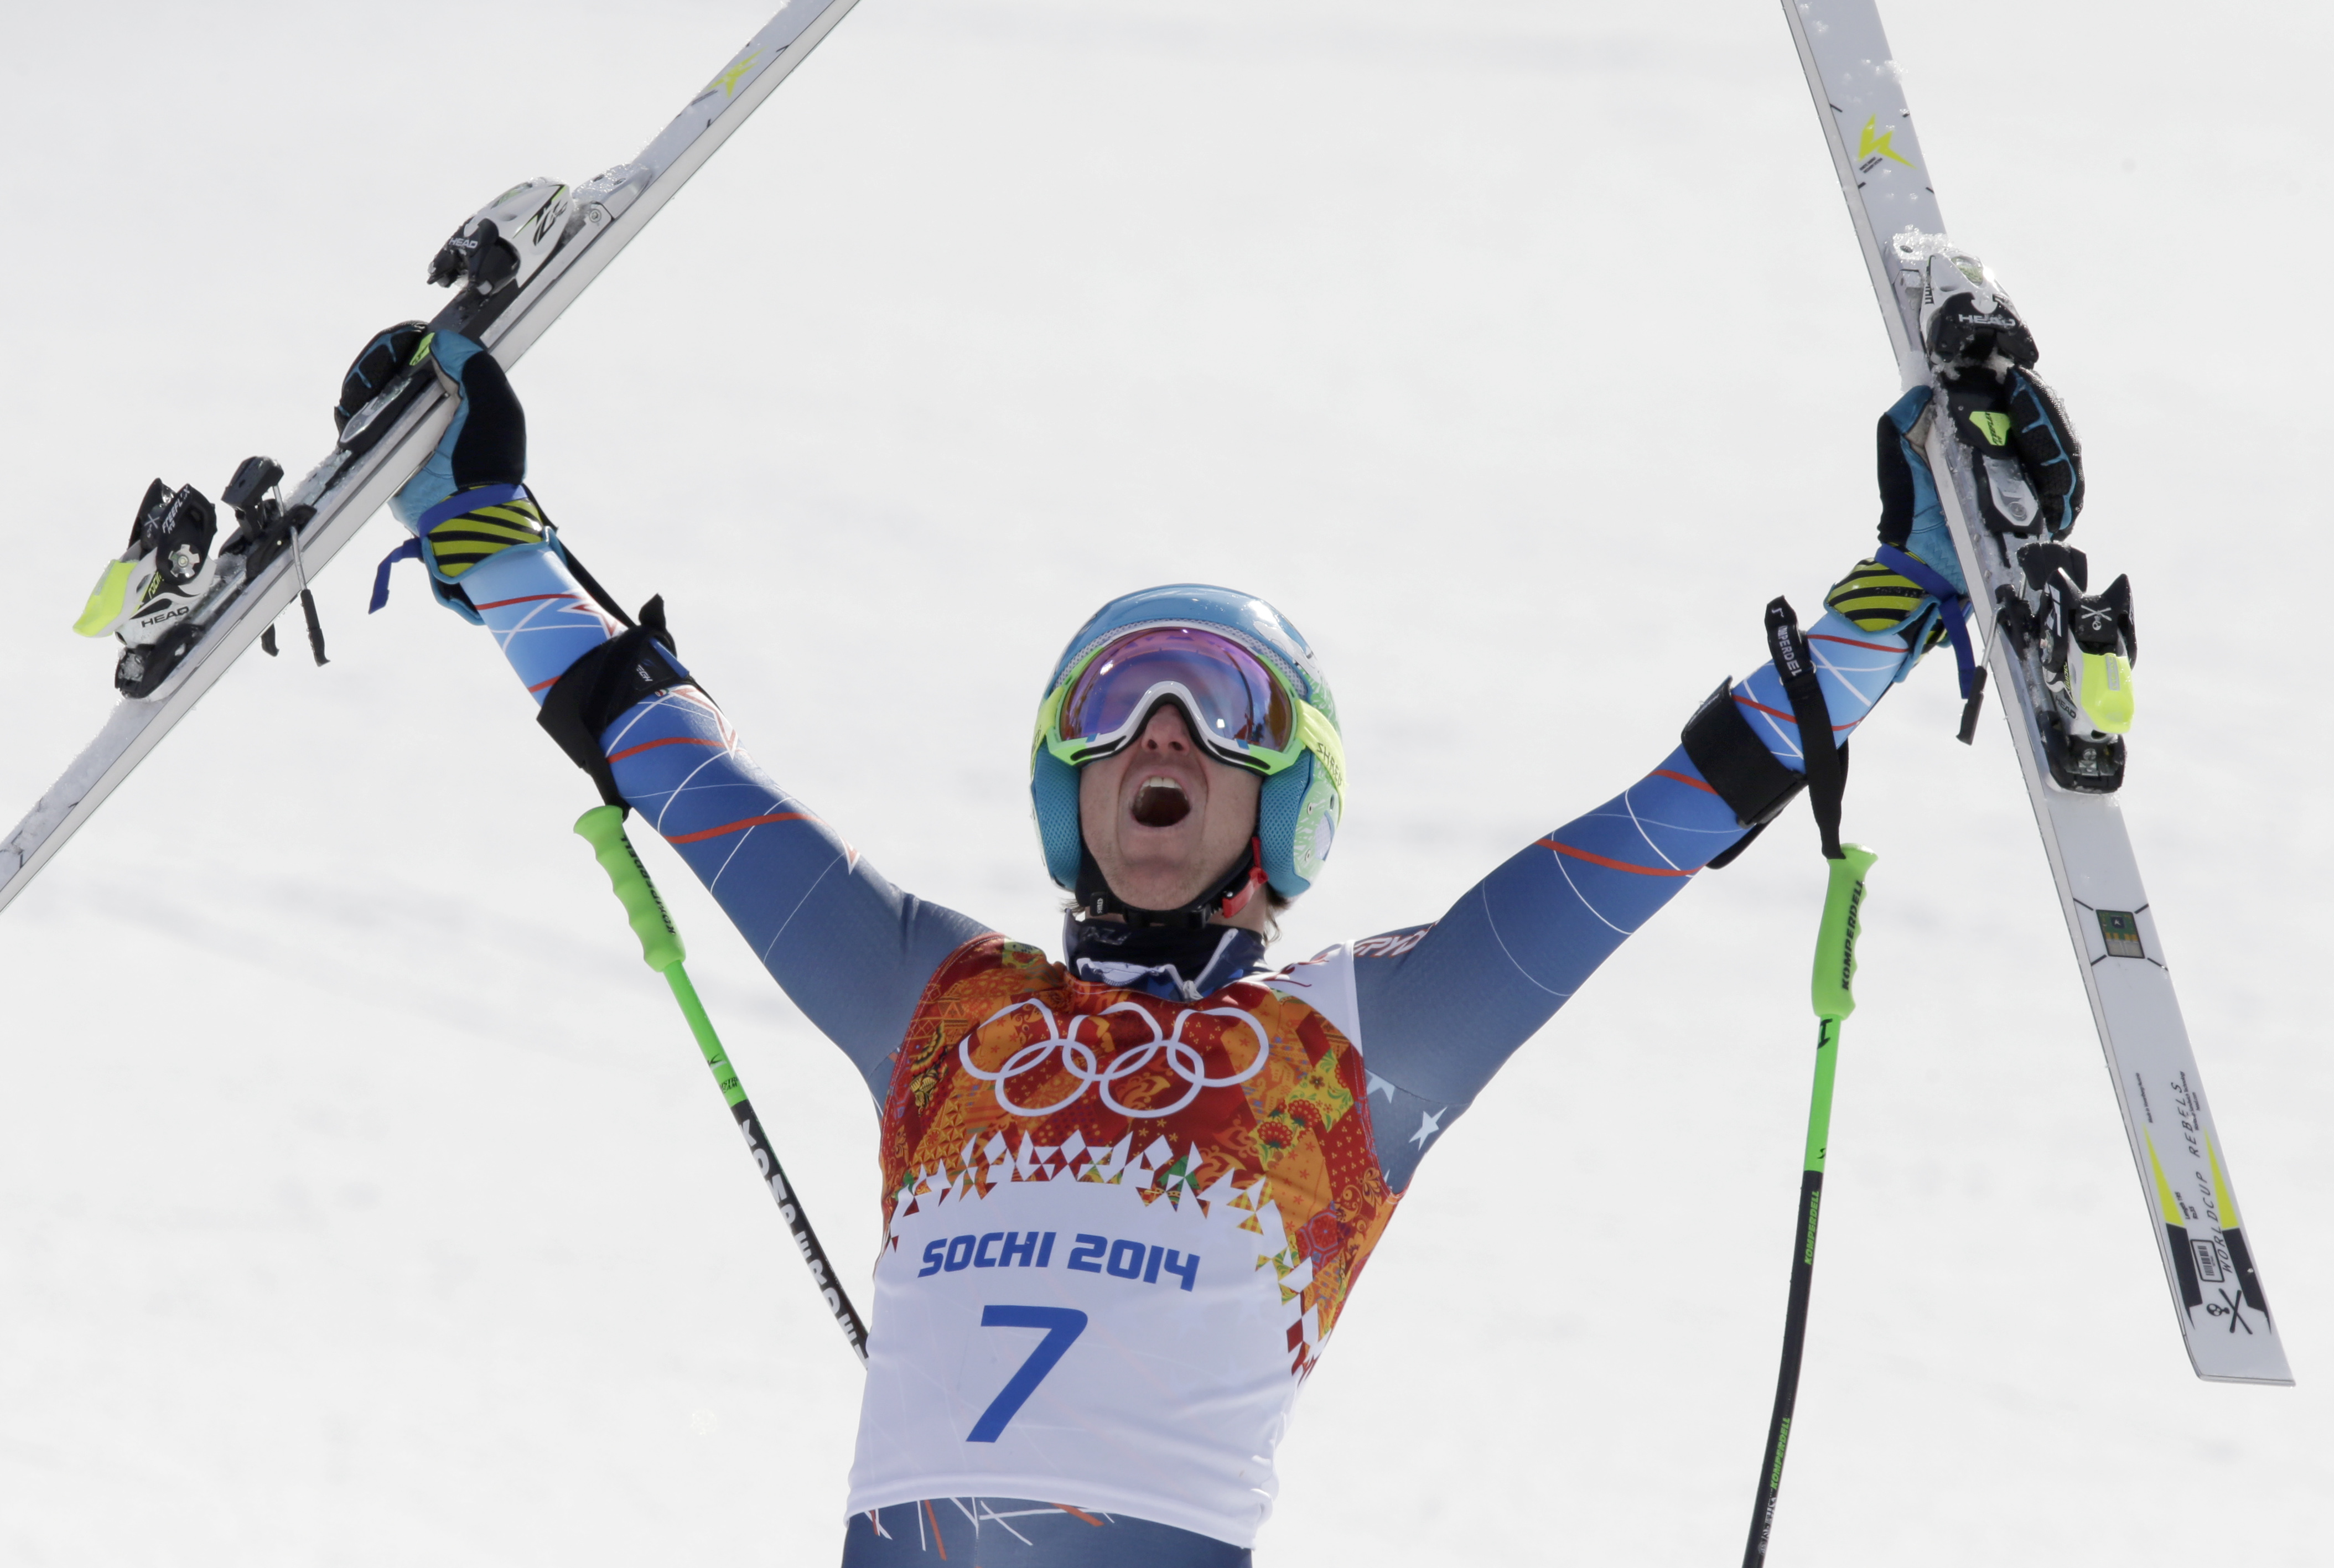 Winter Olympics Ted Ligety grabs gold in giant slalom - CBS